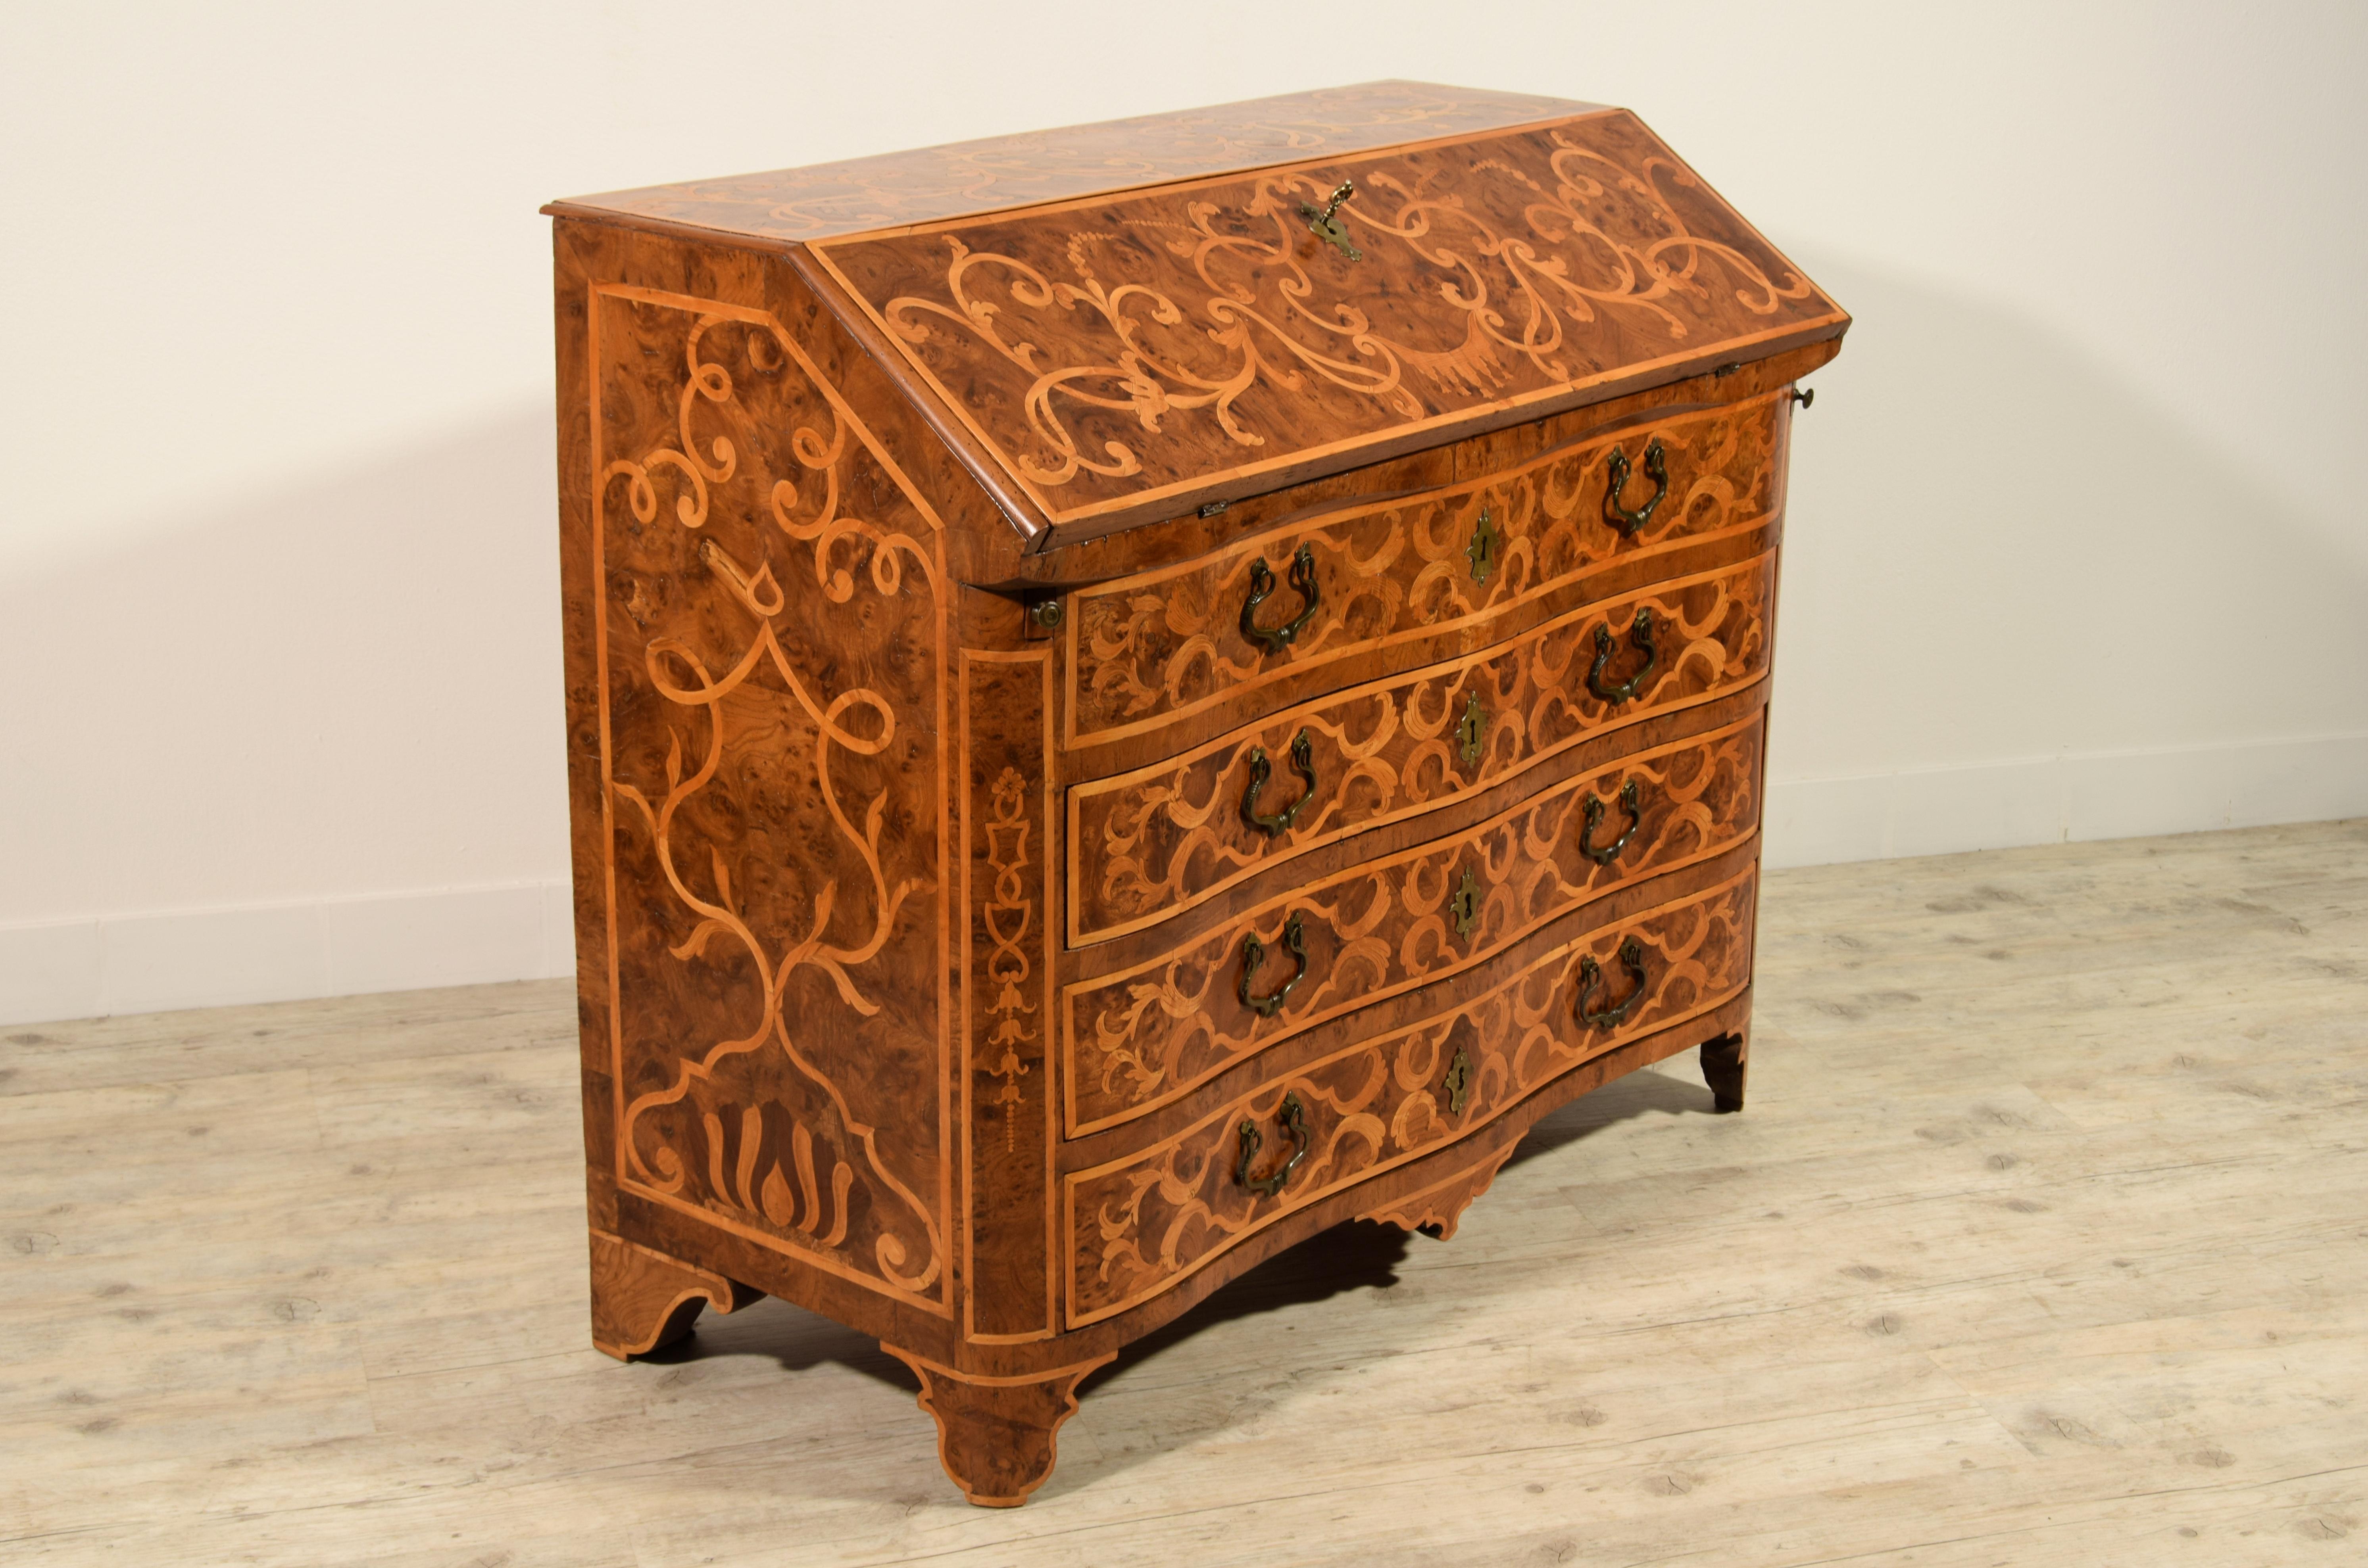 Baroque 18th Century, Italian Inlaid Wood Chest of Drawers with Secretaire For Sale